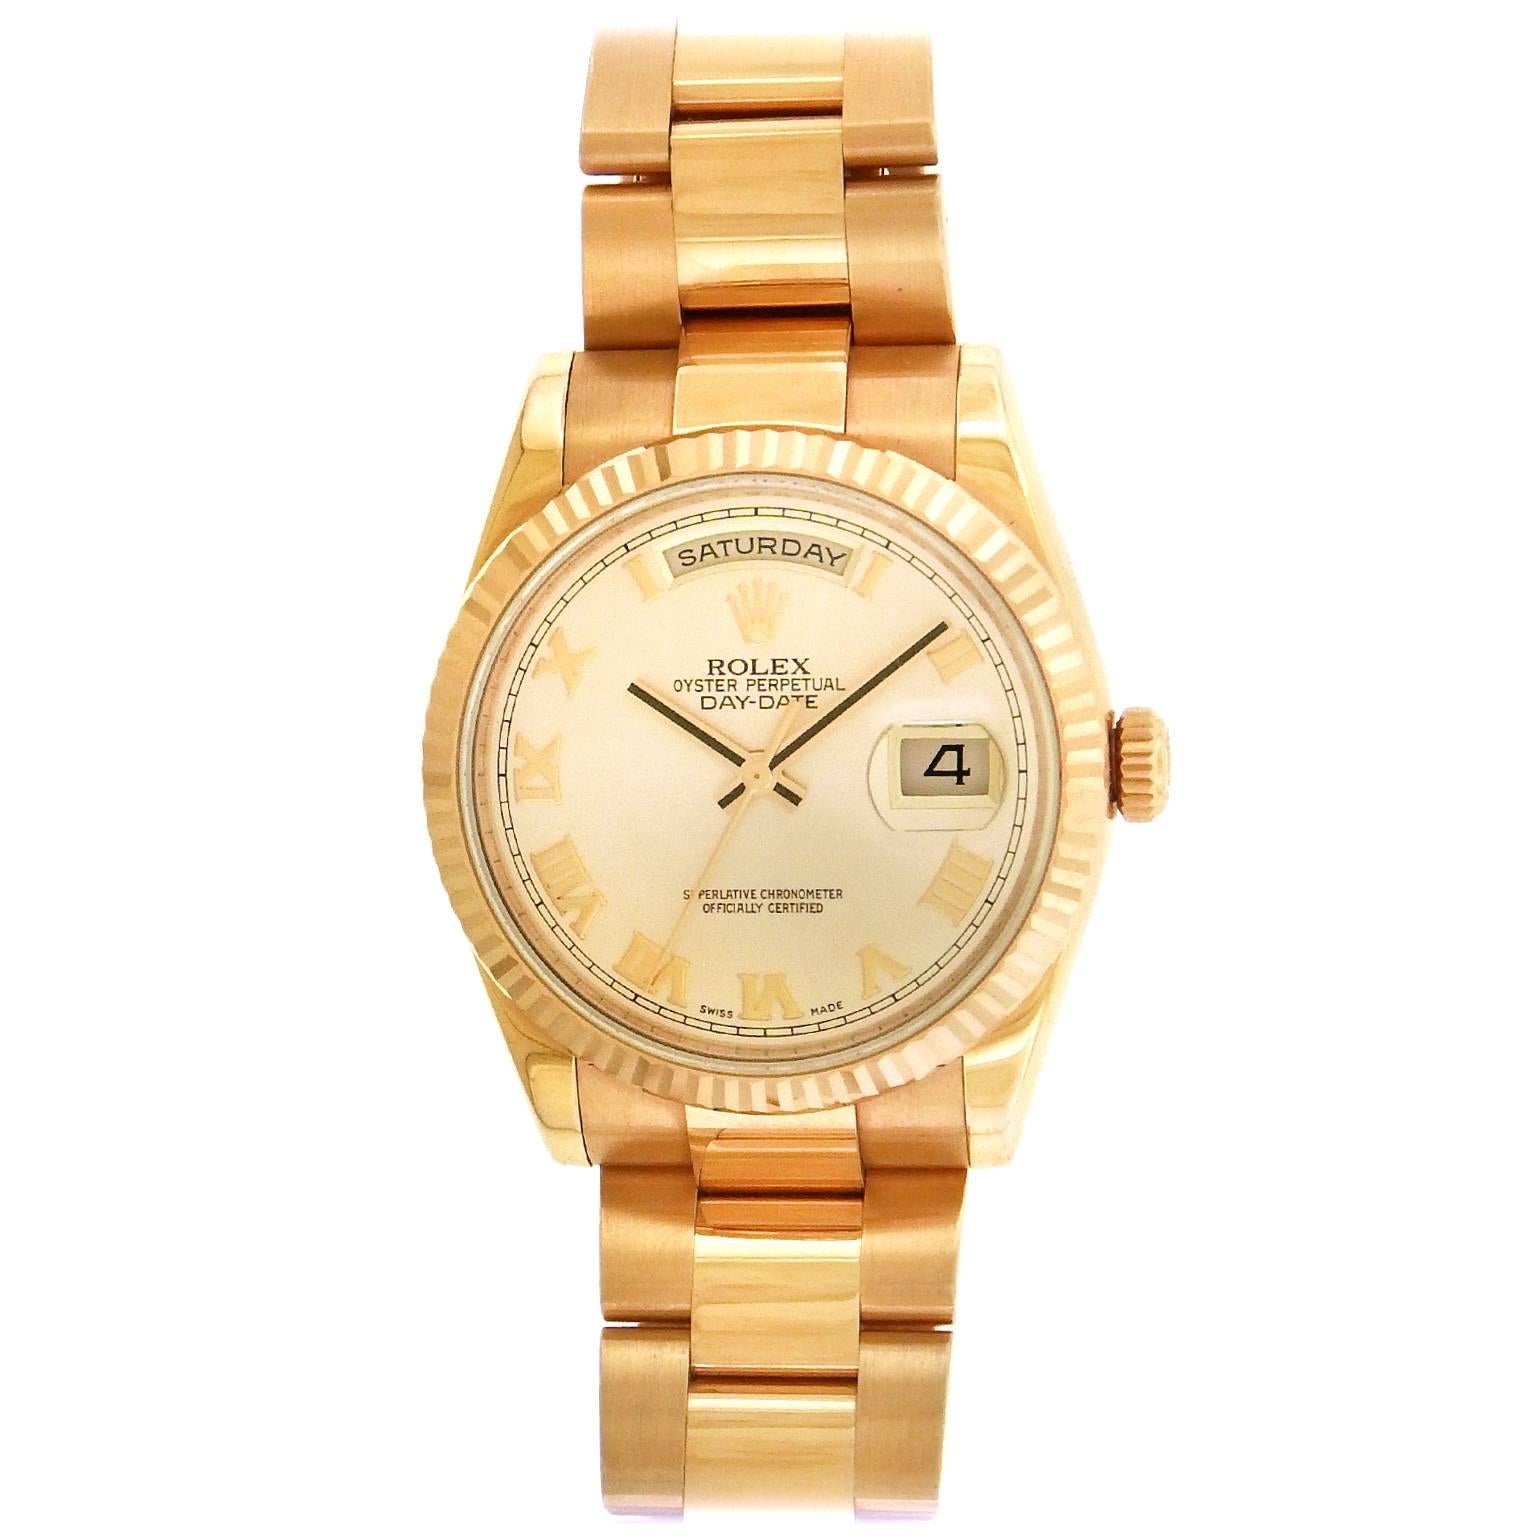 18K rose gold Rolex Day-Date,  Ref. 118235F,made in 2009, is a water-resistant, center seconds, self-winding, 18K pink gold  wristwatch with day, date and an 18K pink gold Rolex President bracelet with concealed deployant clasp, accompanied by